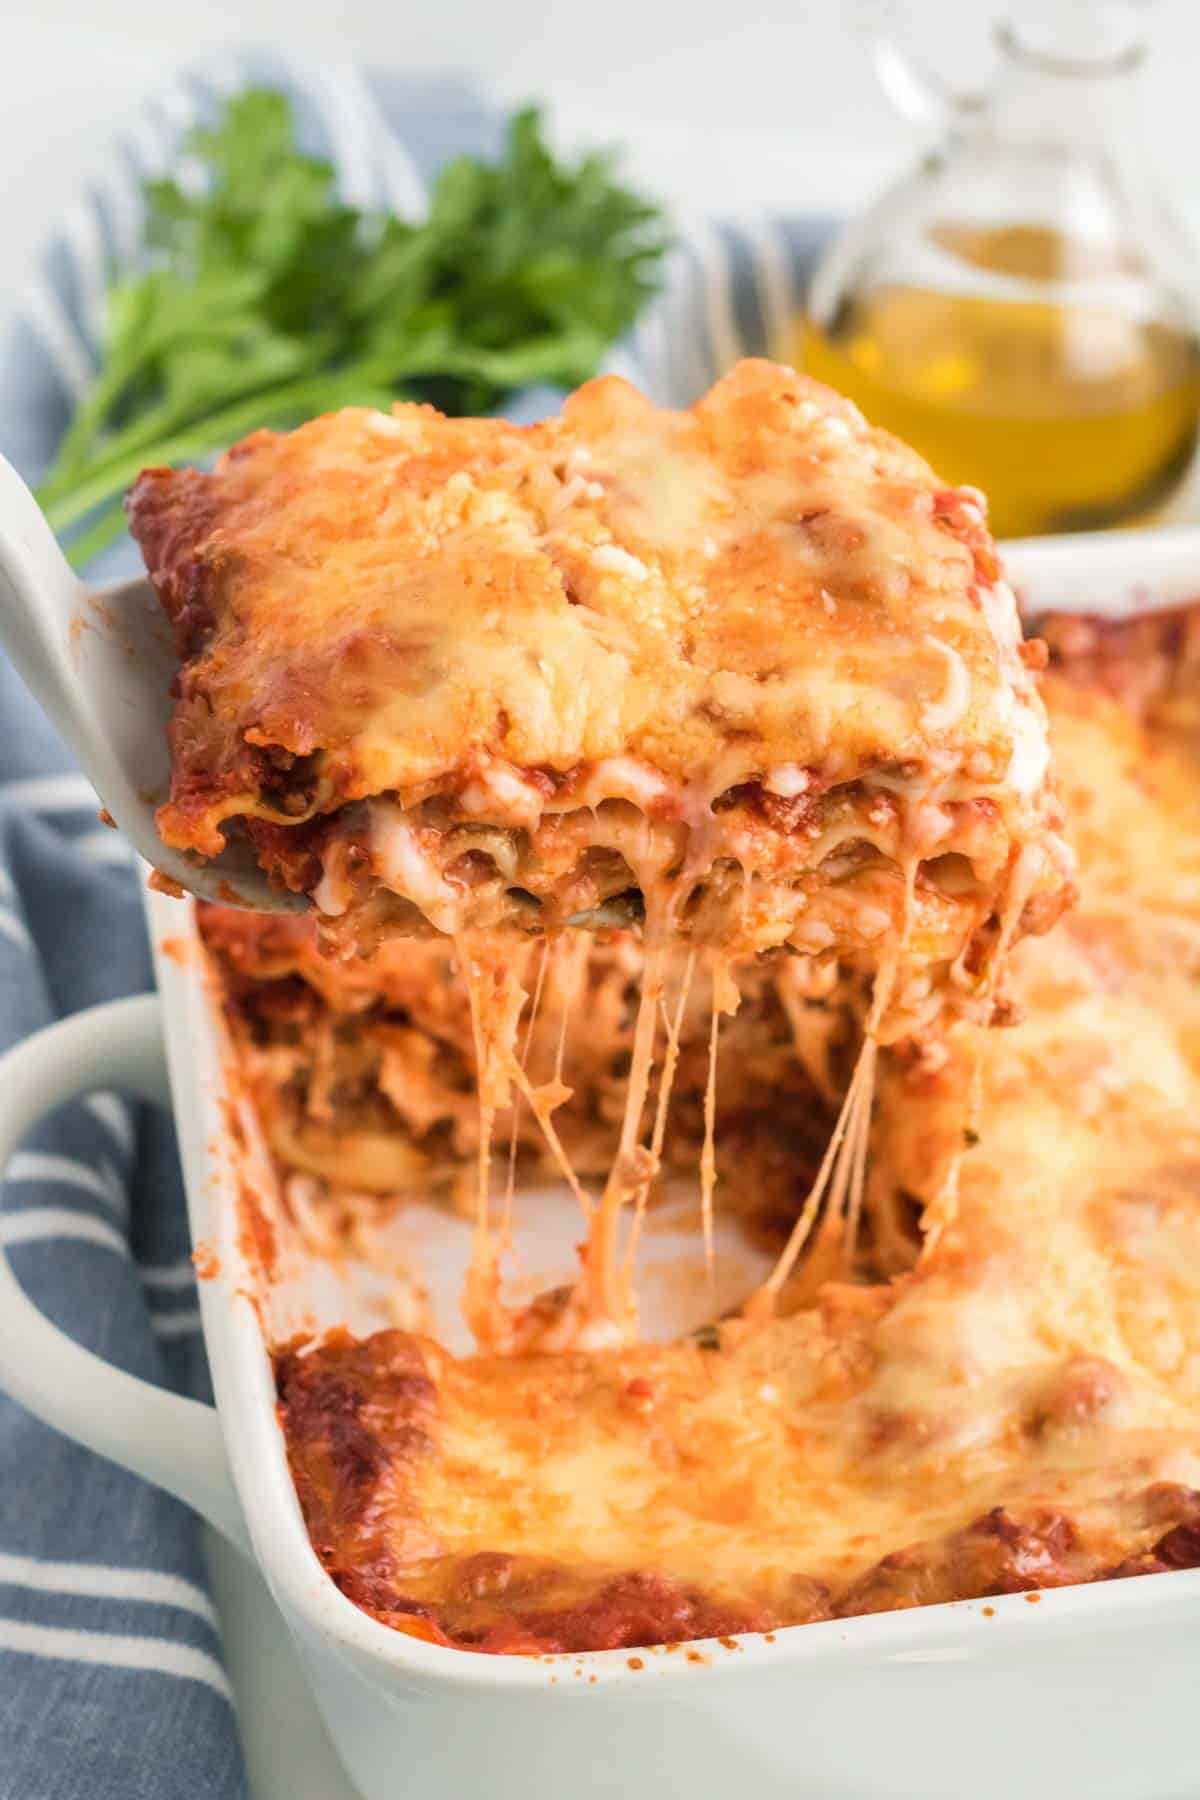 A slice of lasagna being lifted out of pan